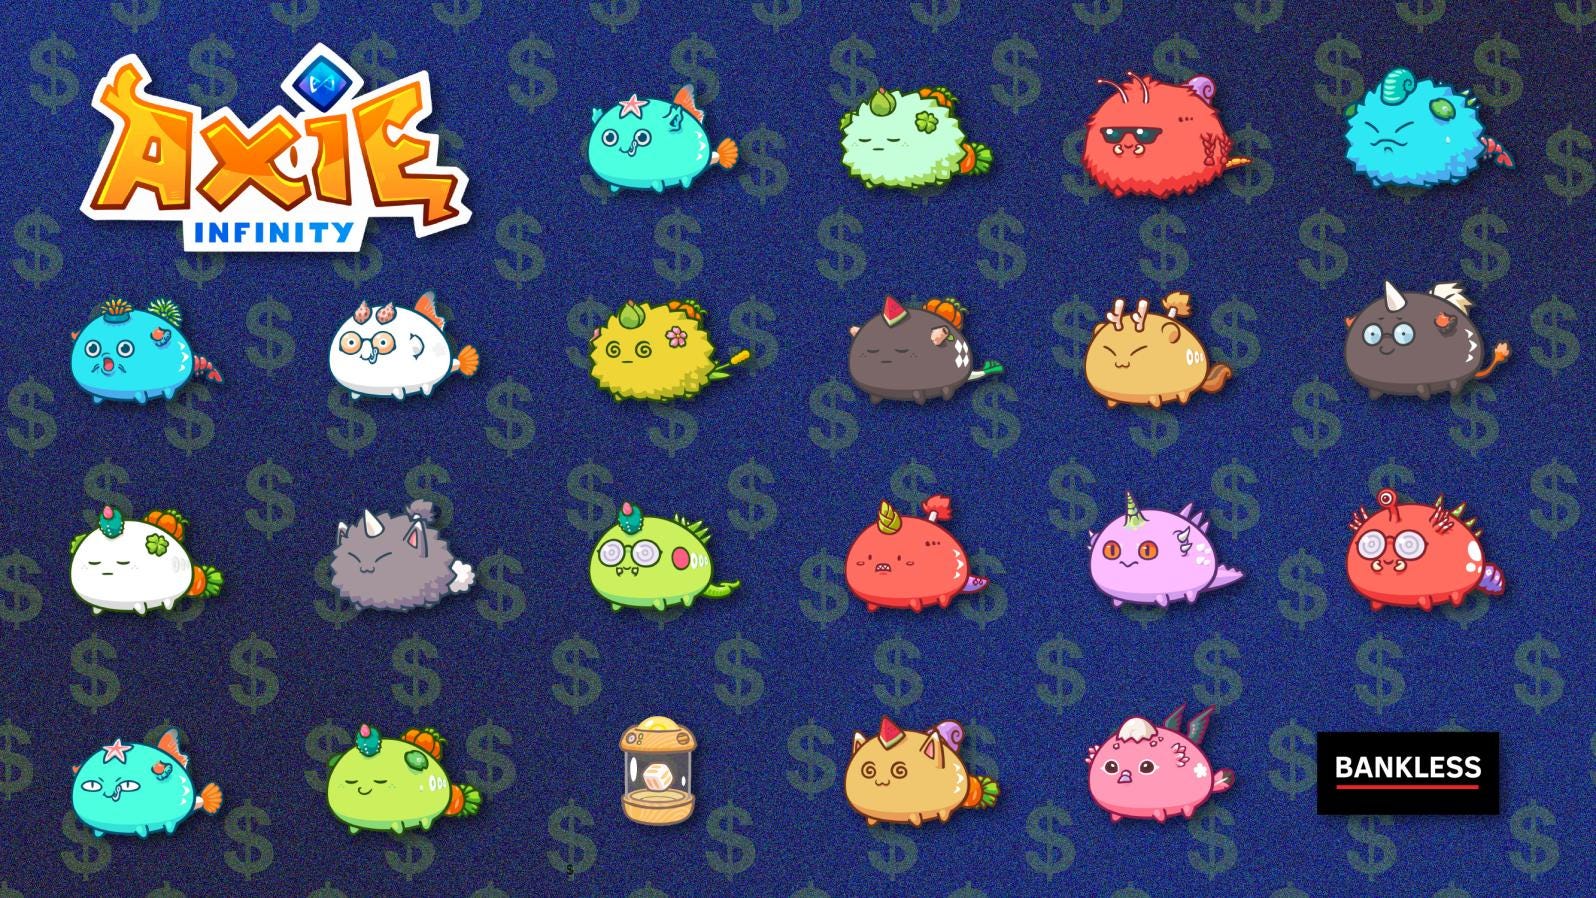 How To Make Money With Axie Infinity